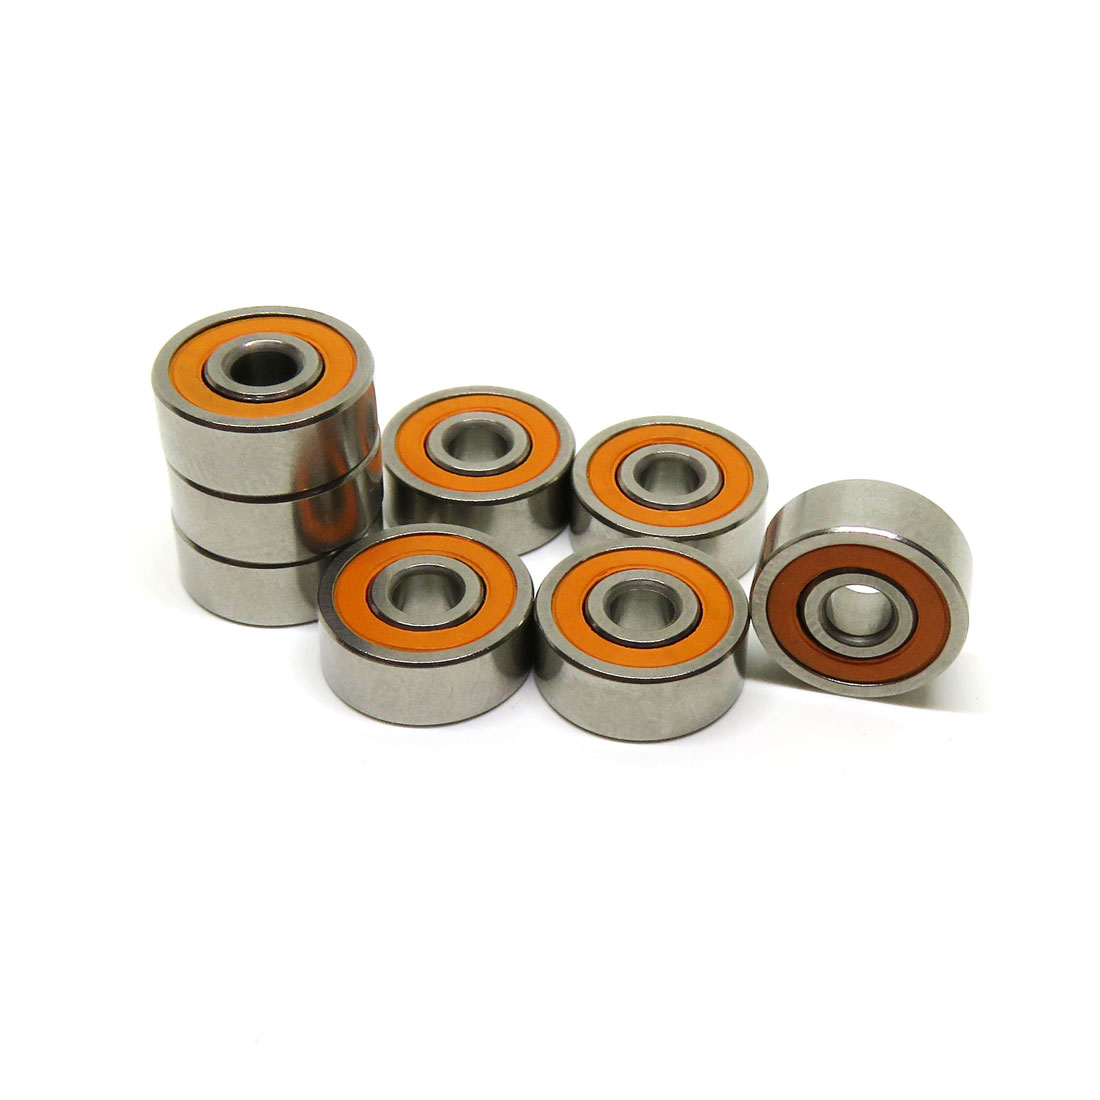 S623-2RS 3x10x4 Stainless Steel Sealed Miniature Ball Bearings Fishing Reel Side Cover Bearings